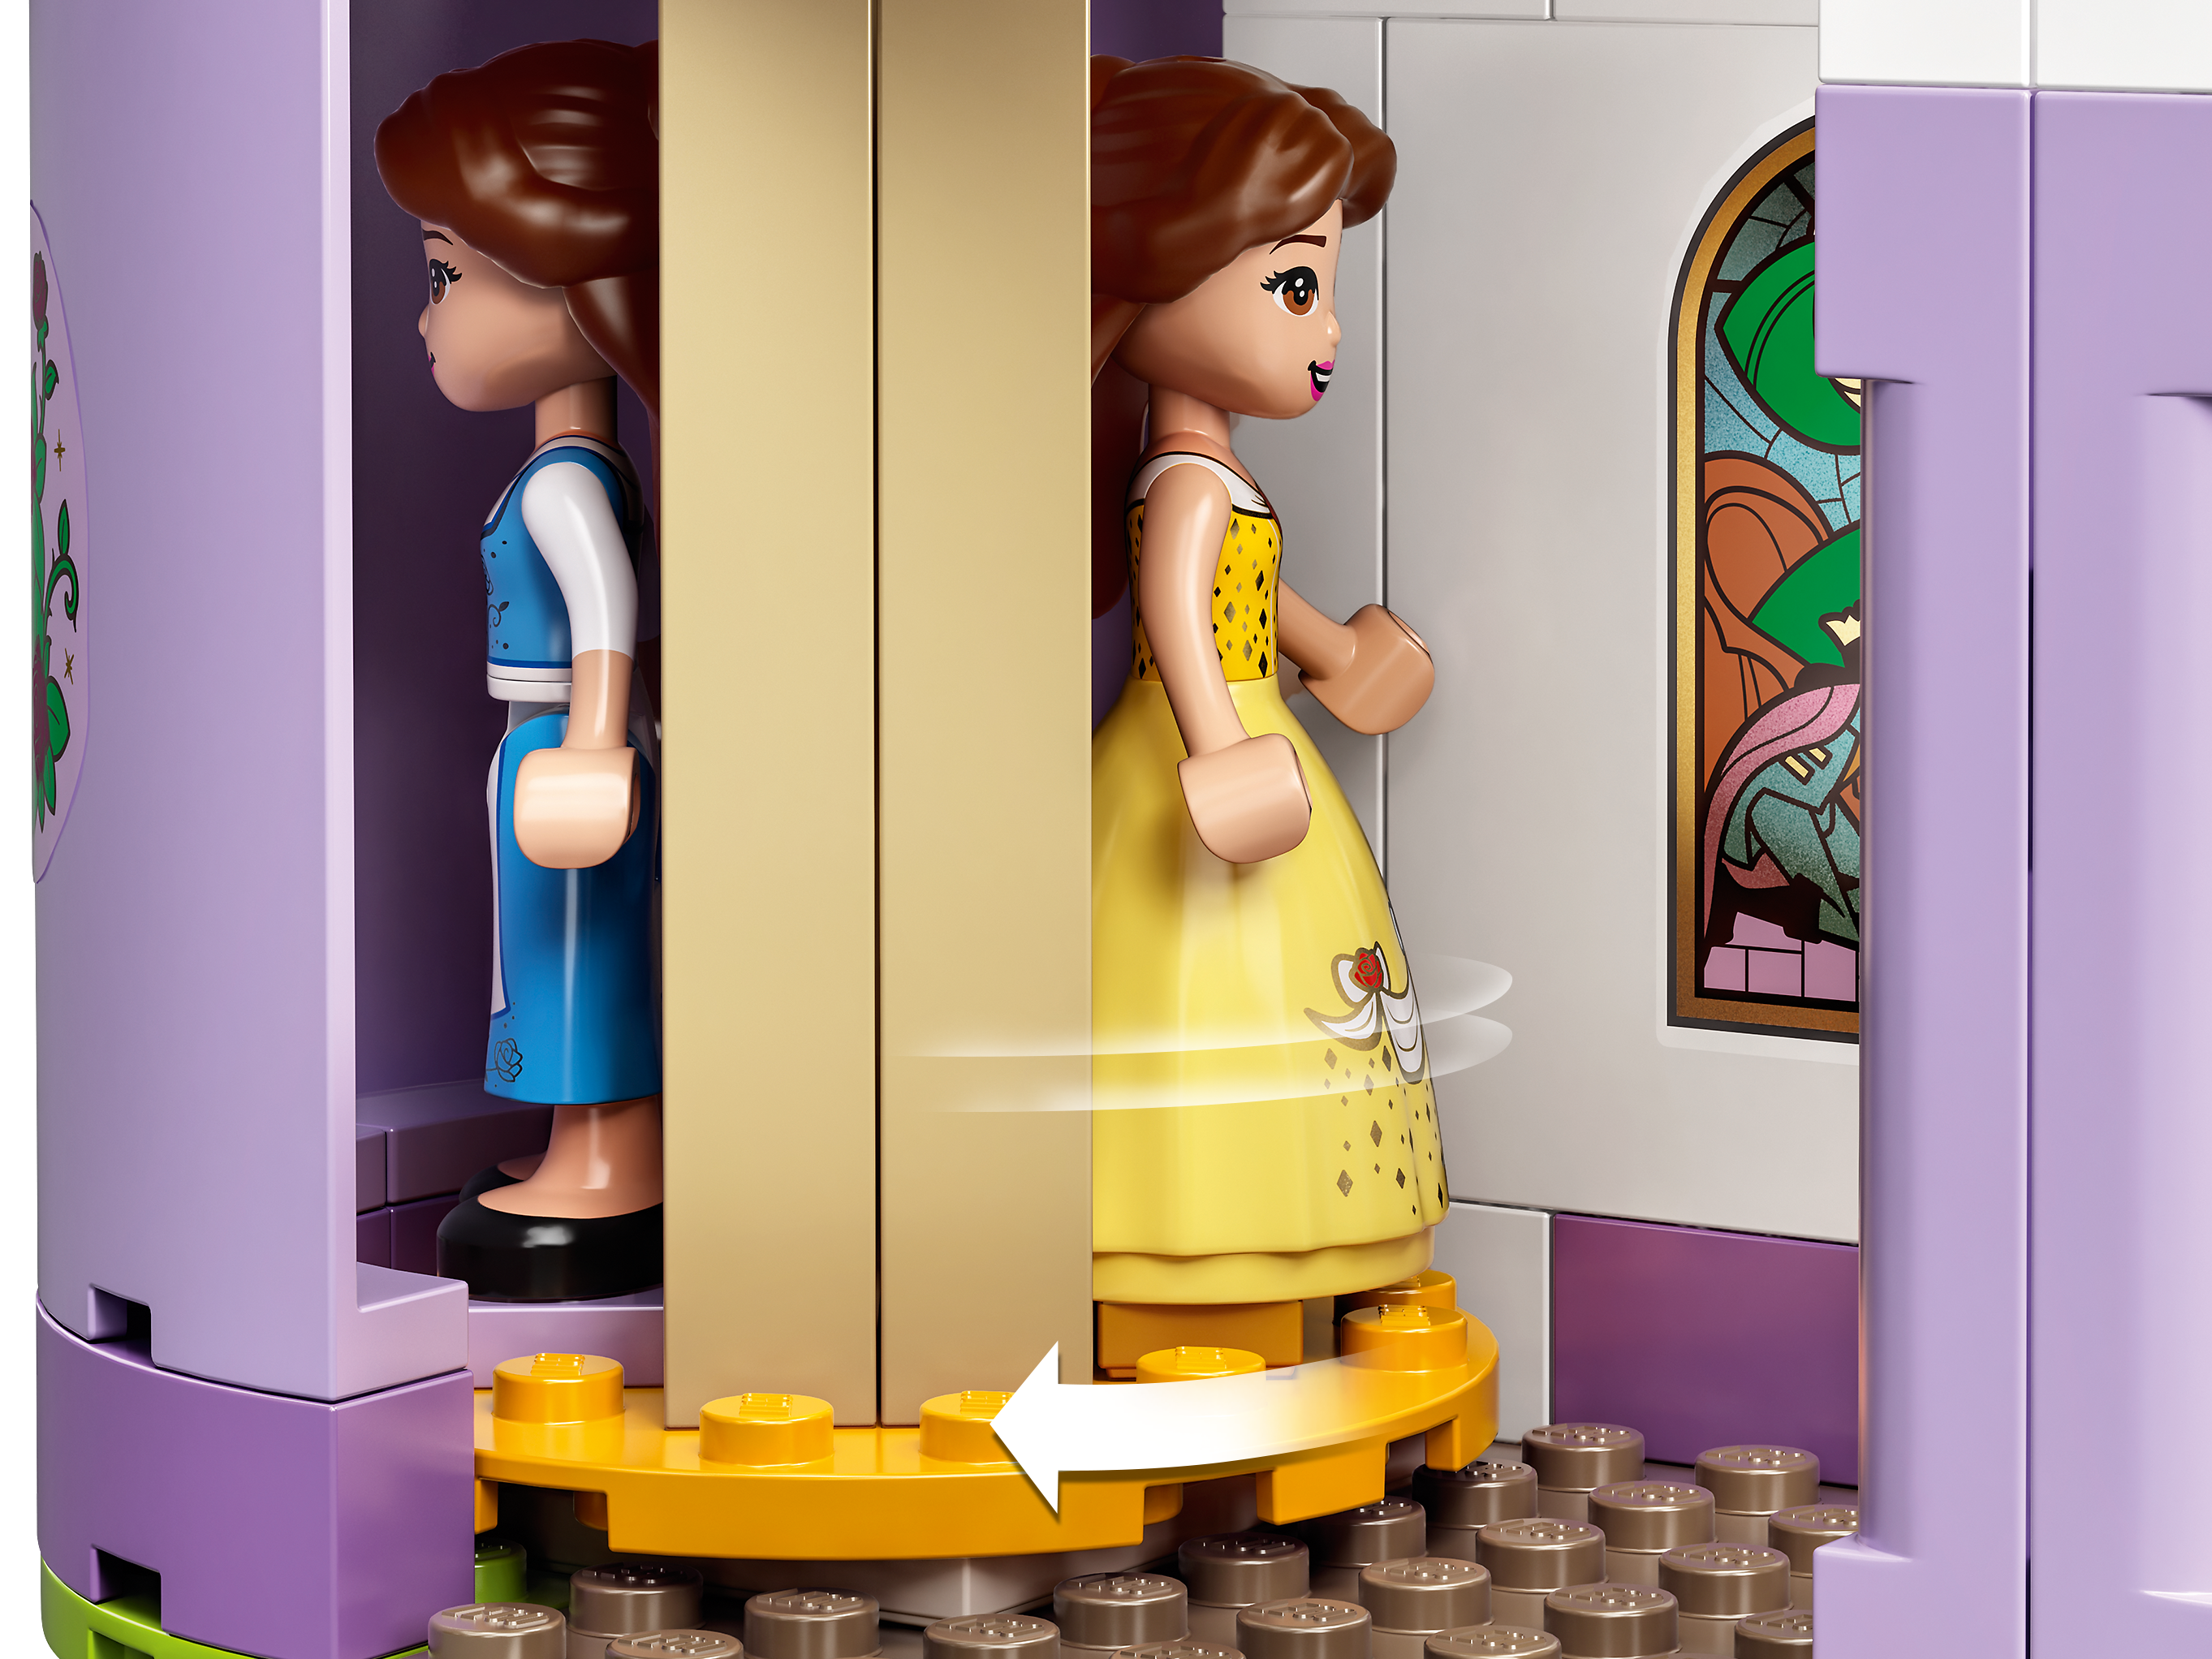 Lego Princess Belle & The Beasts Castle 43196 - Albagame